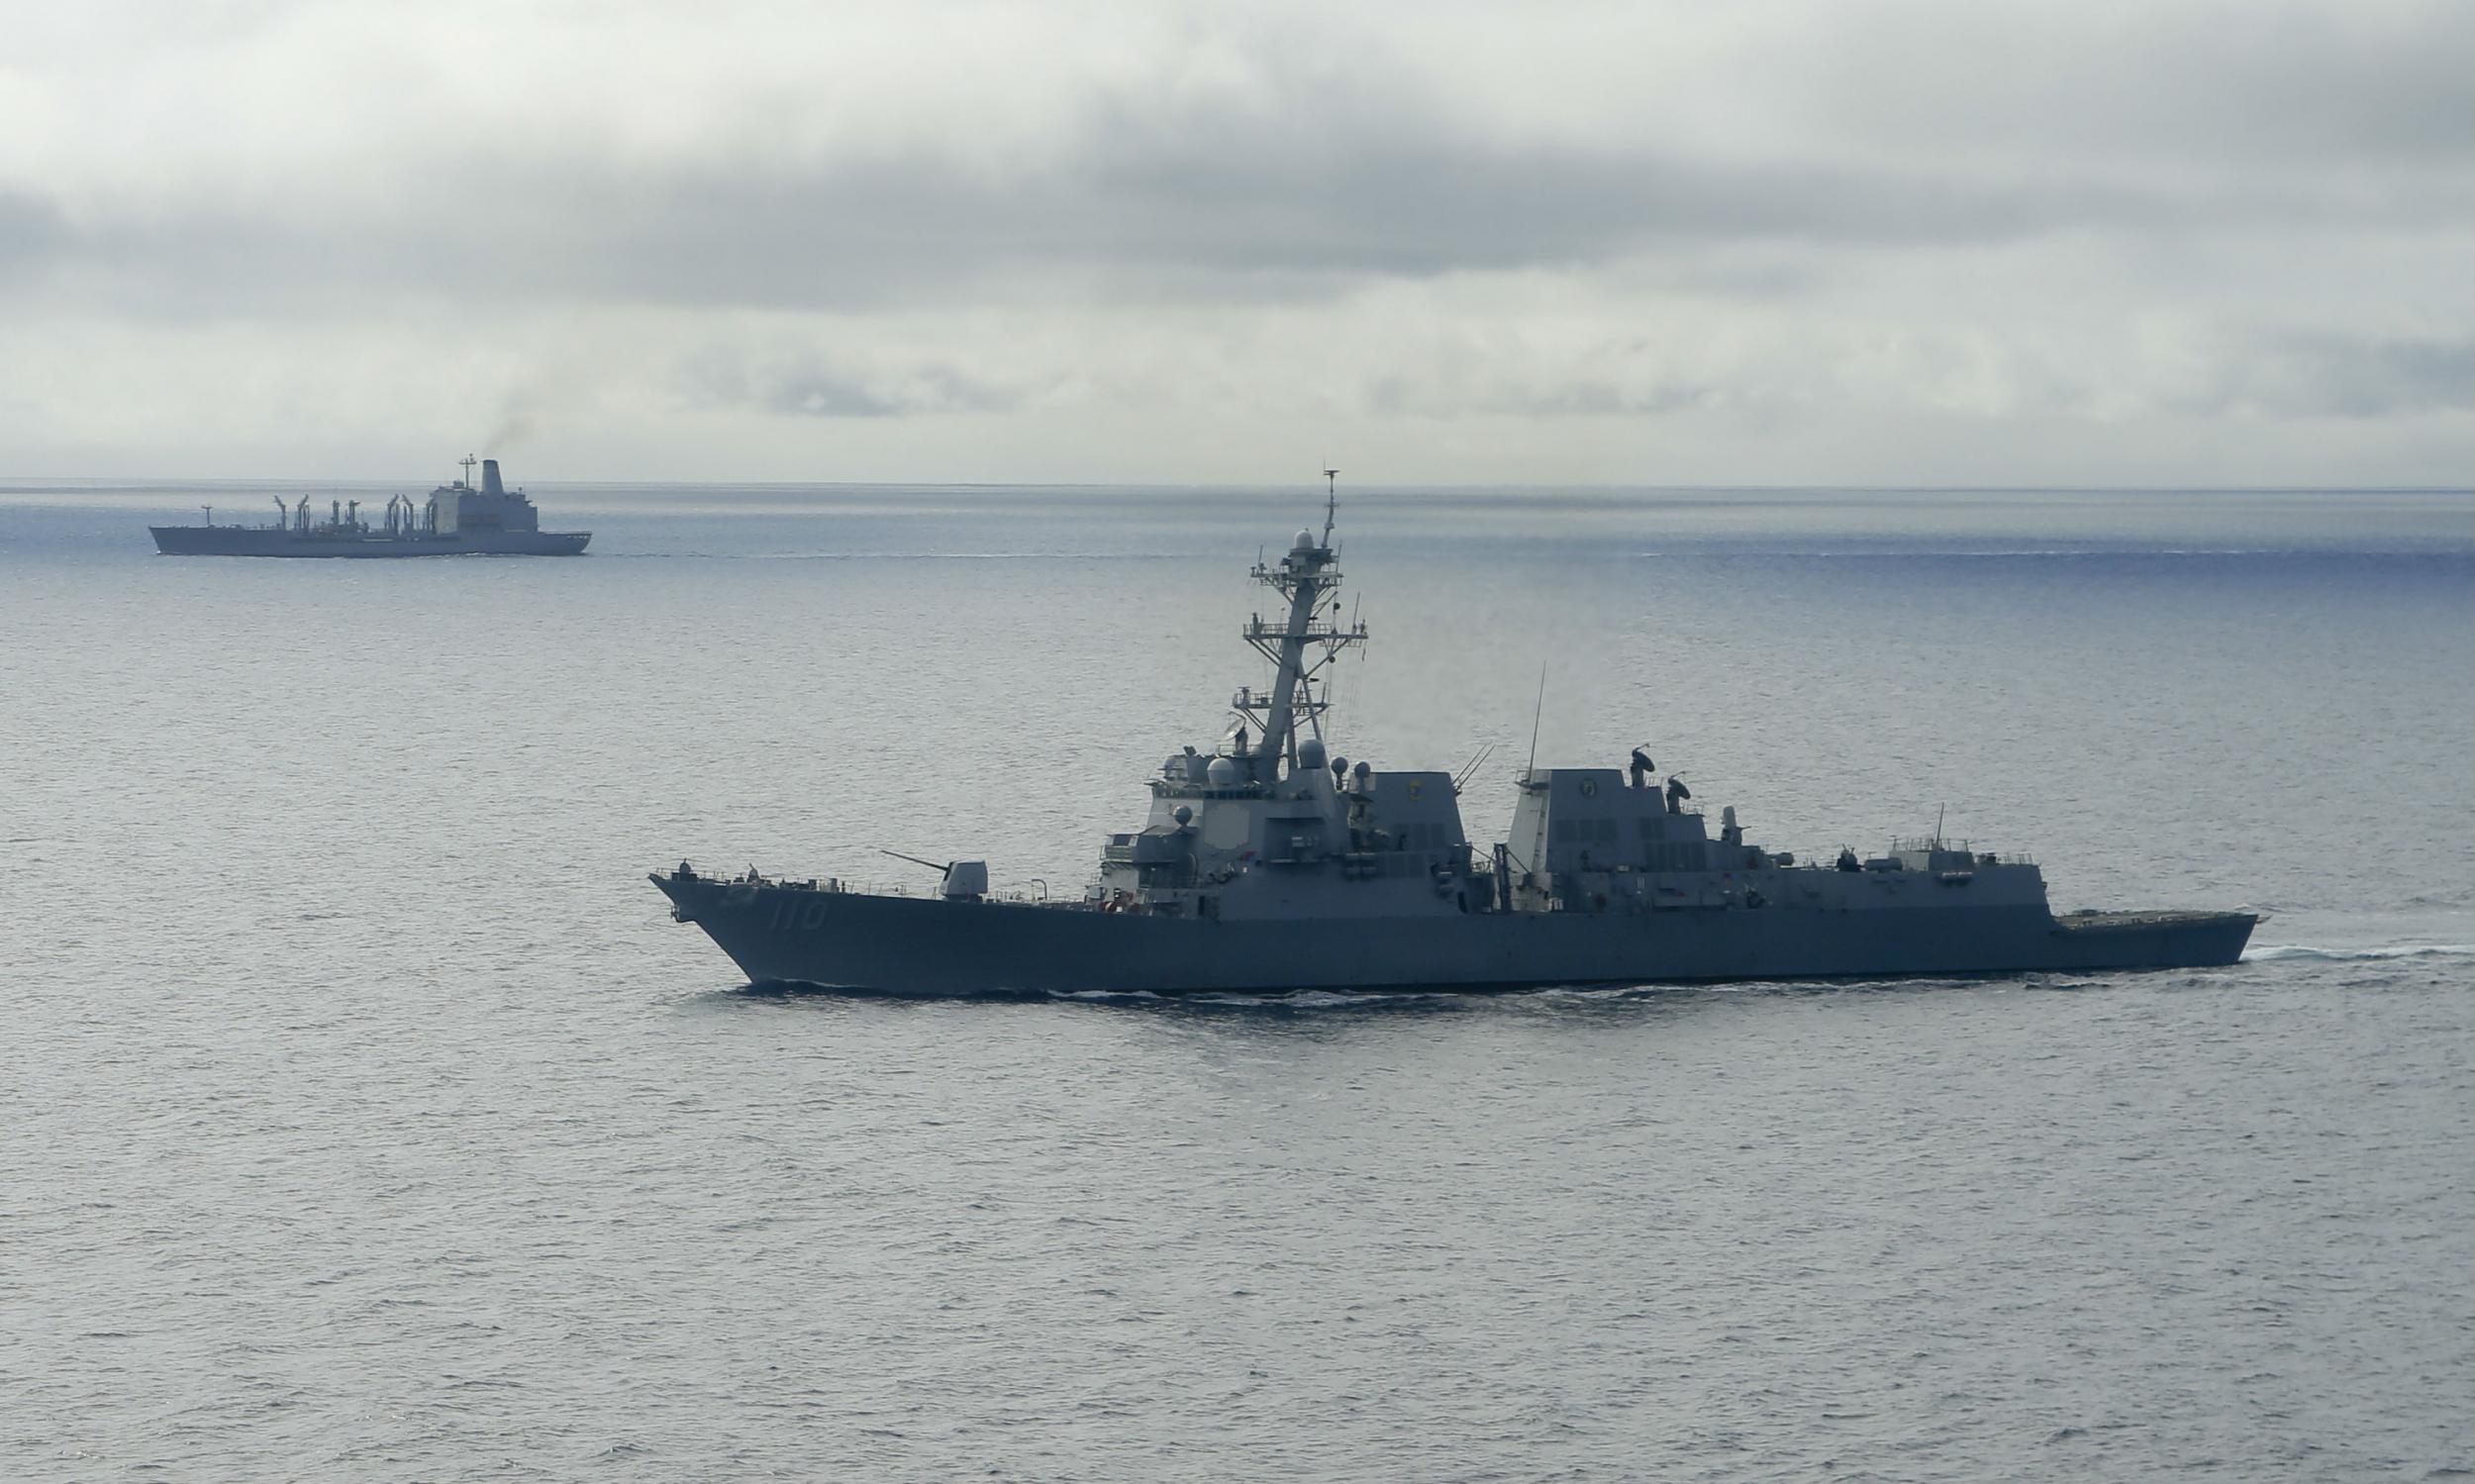 The US and China have accused each other of militarising the South China Sea